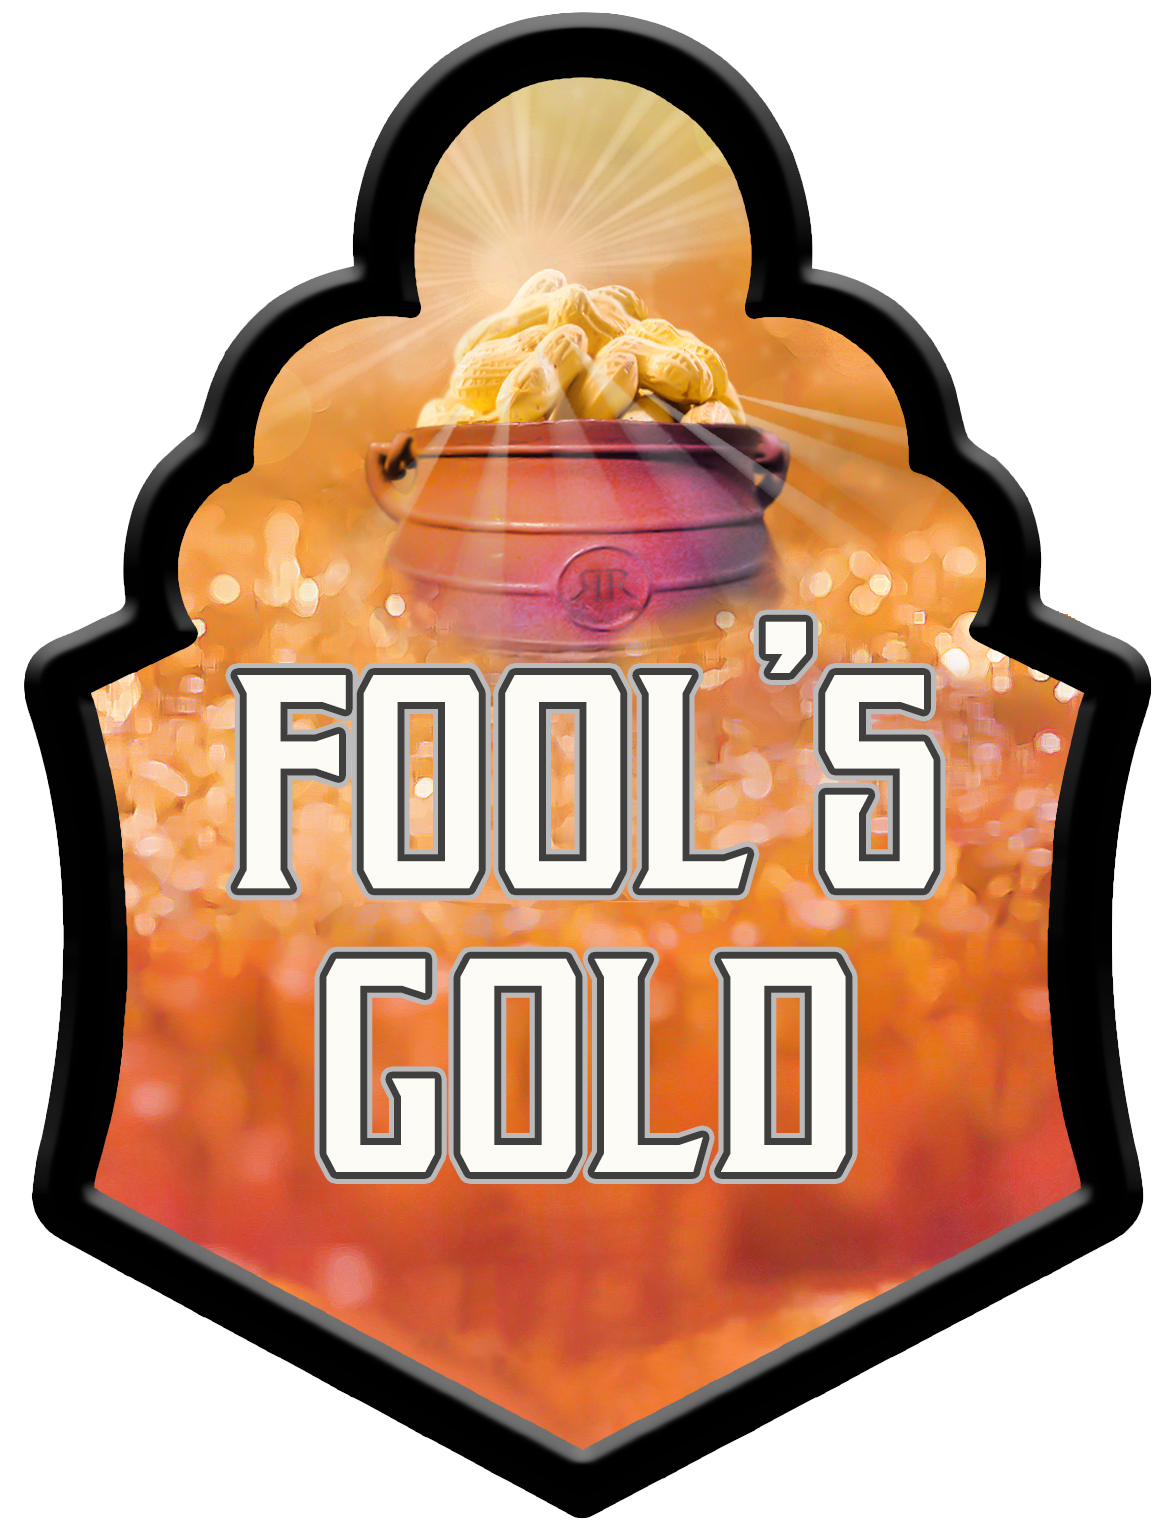 Fool's Gold - Imperial Peanut Butter Hefeweizen - ABV 8.0